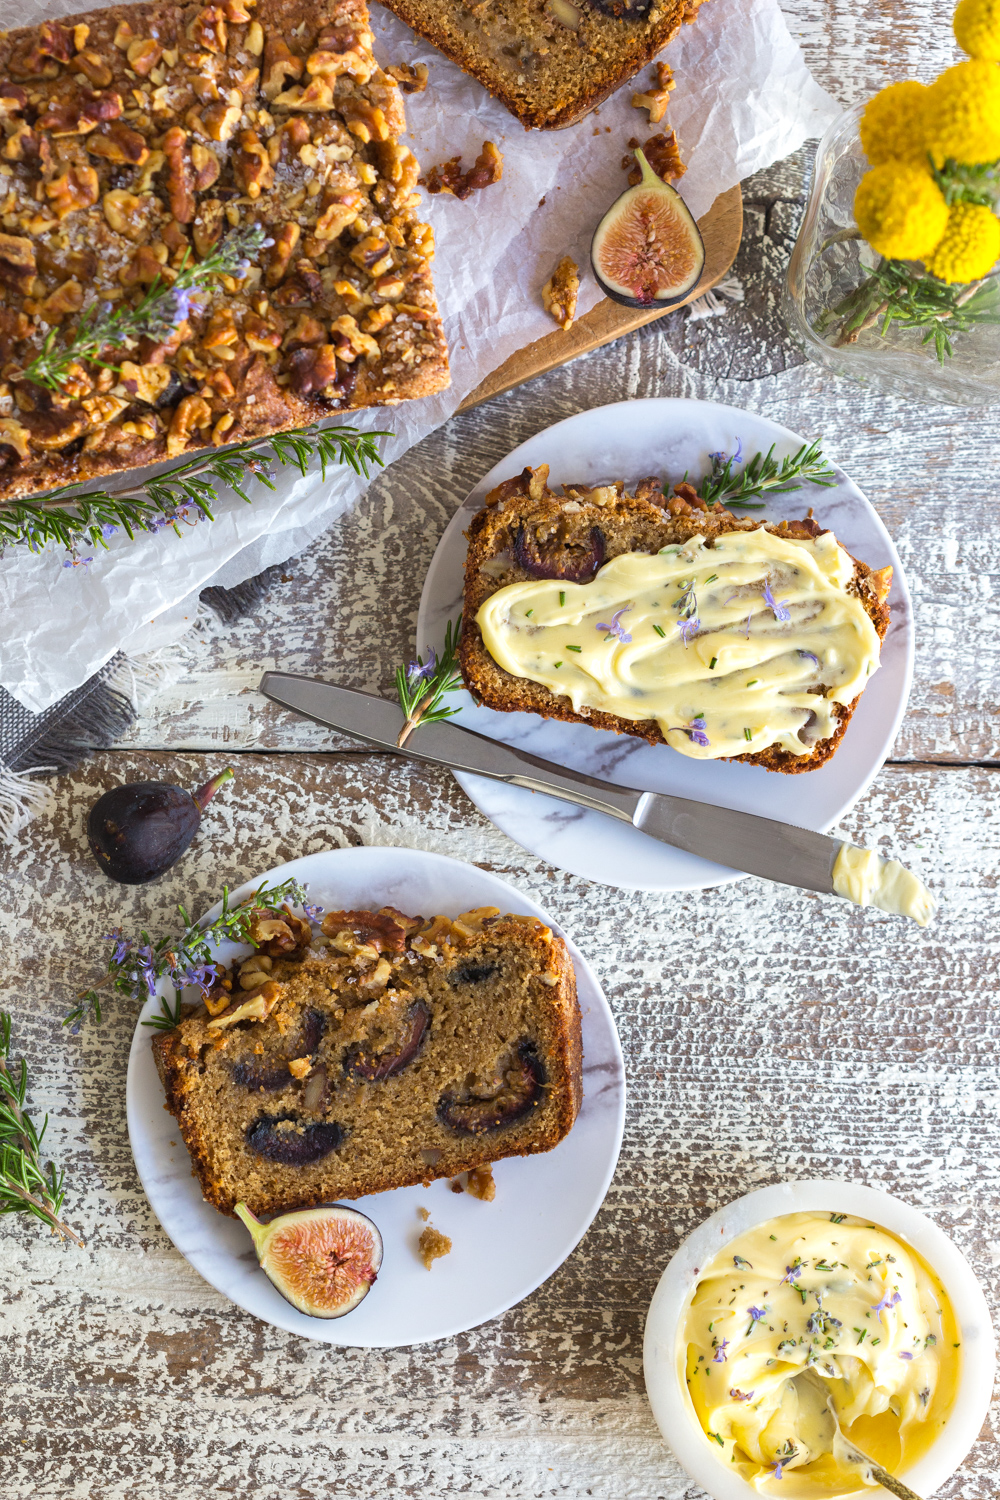 Caramelized Fig and Walnut Bread with Rosemary Honey Butter